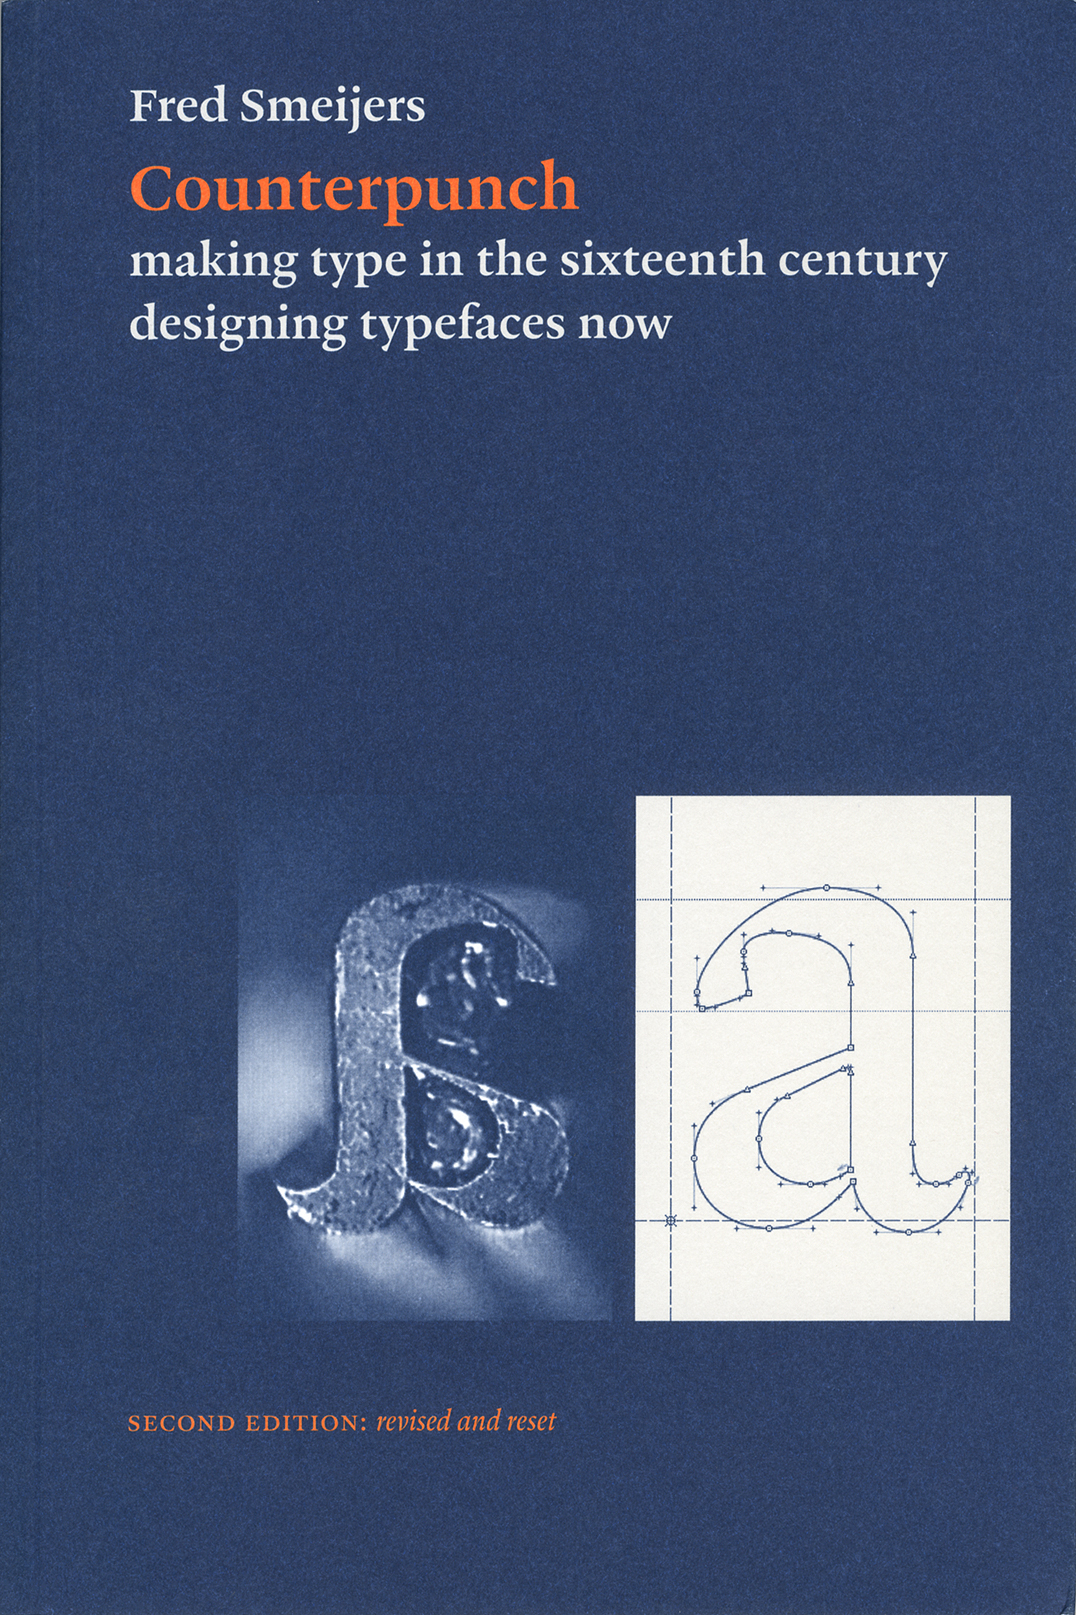 Counterpunch: making type in the sixteenth century, designing typefaces now